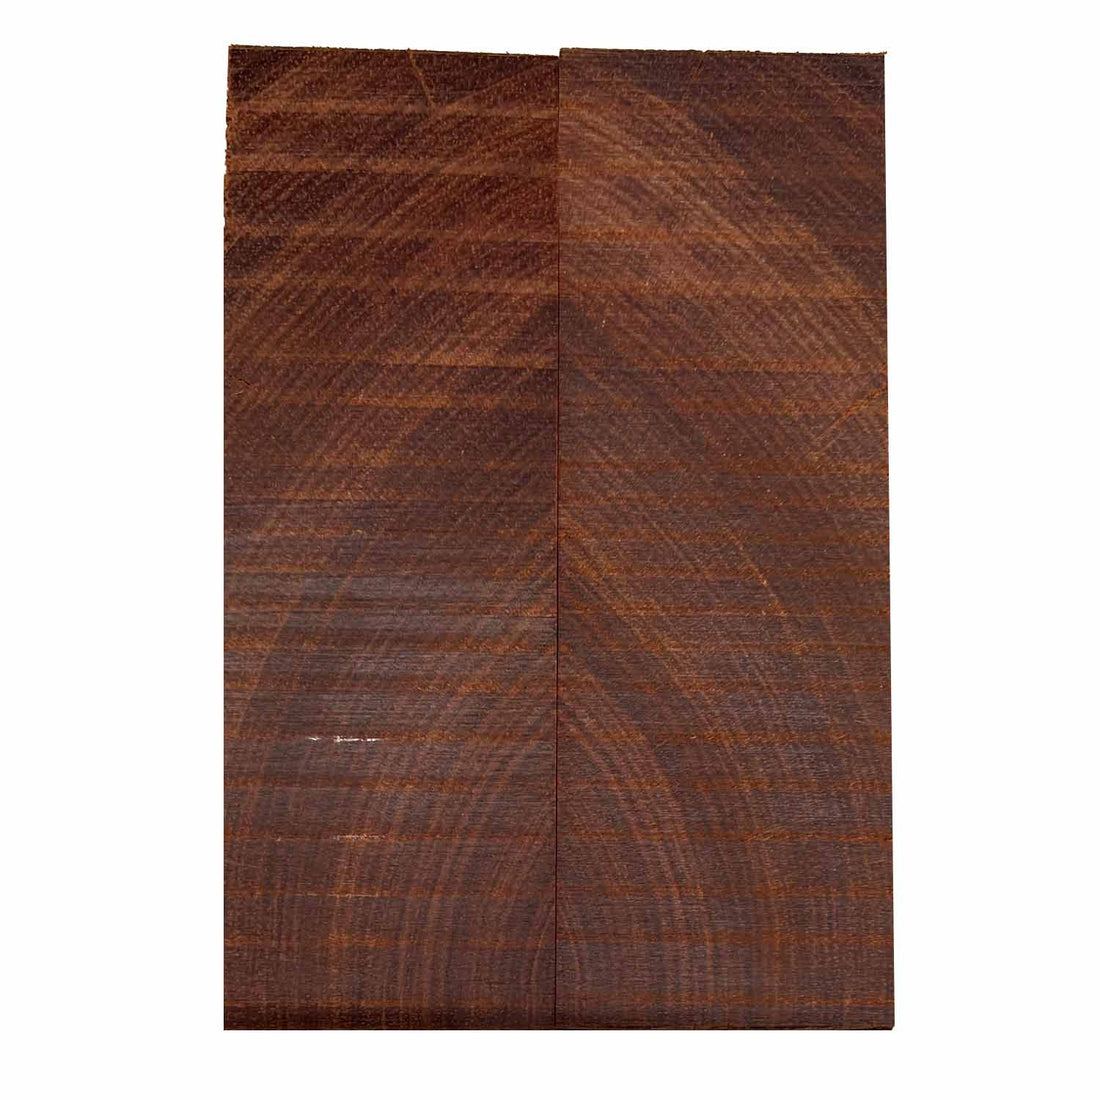 Black Cherry Crosscut Wood Knife Blanks/Knife Scales Bookmatched 5